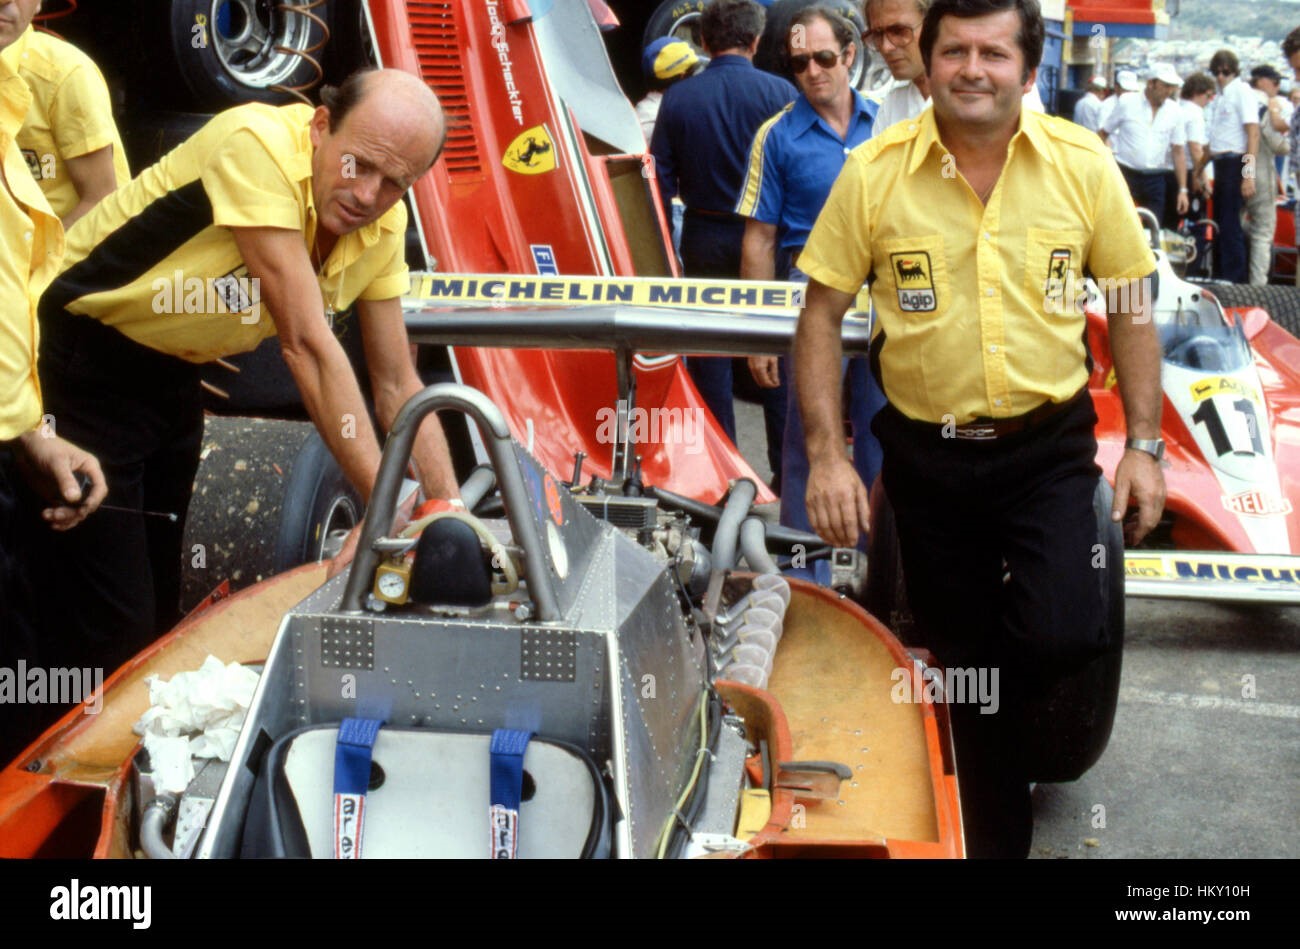 1979 South African GP, Ferrari 312 T4 at the pits.